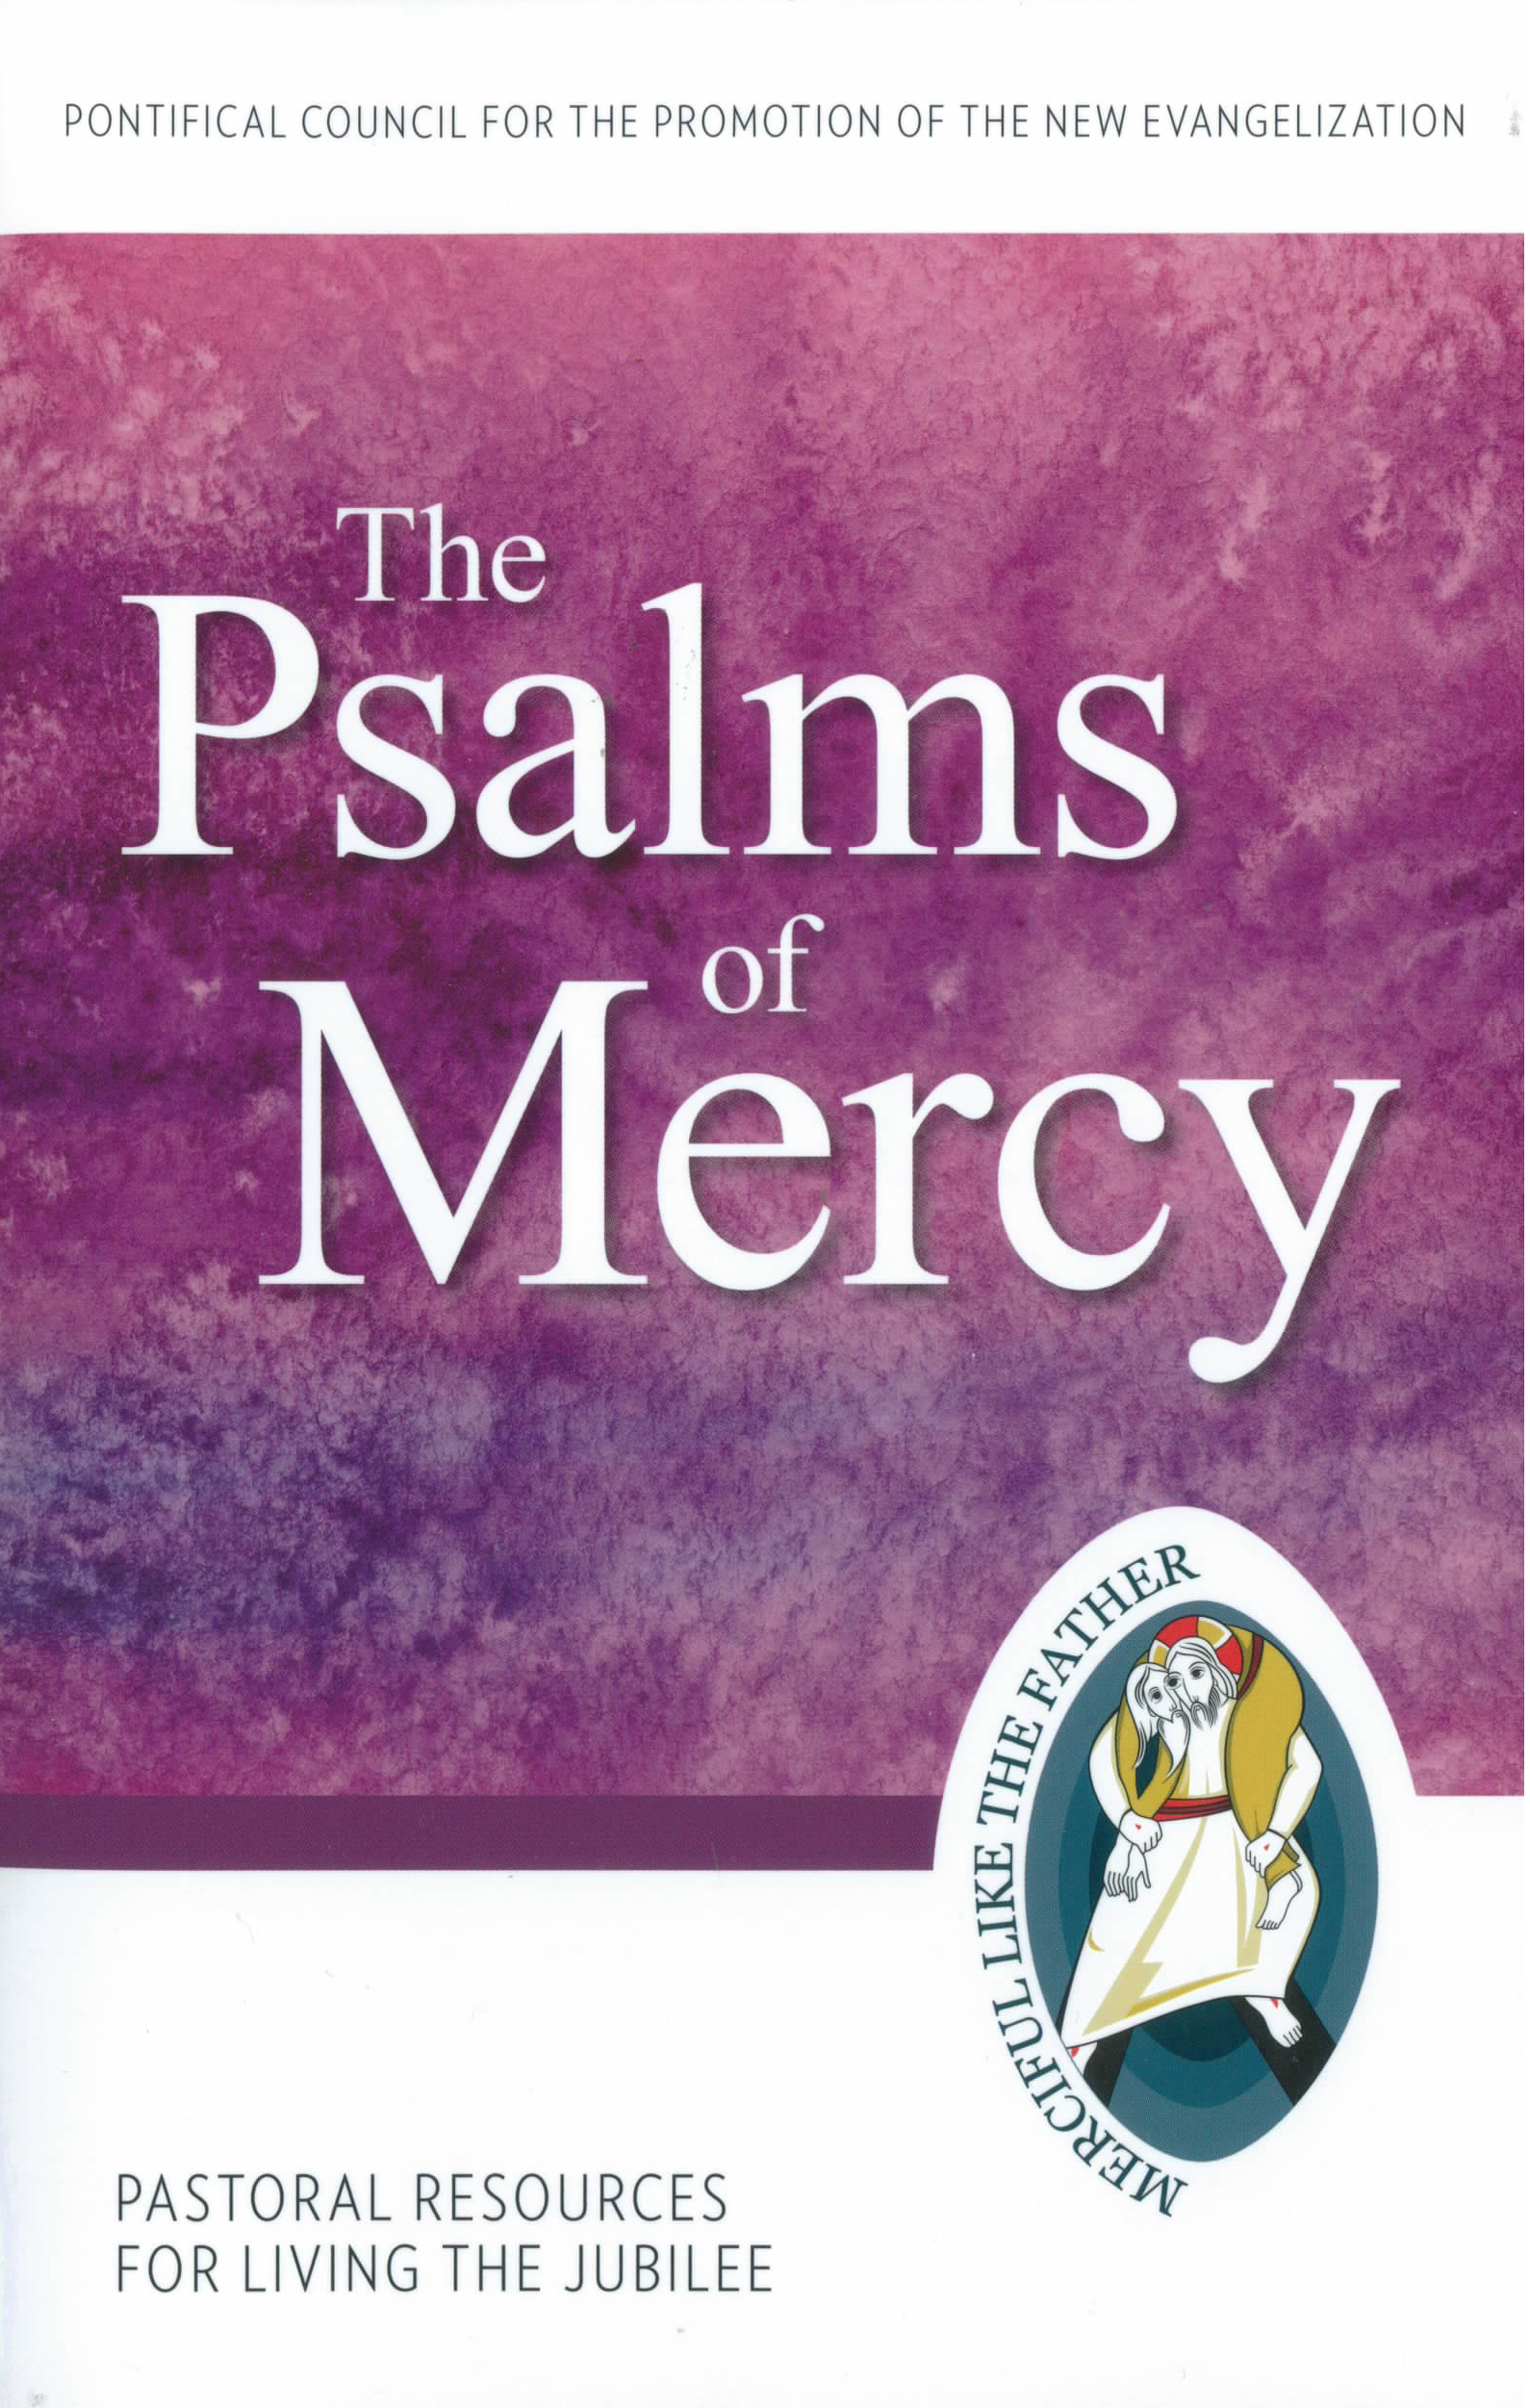 The Psalms of Mercy 9781612789767 Pastoral Resources for Living the Jubilee Pontifical Council for the Promotion of the New Evangelization Year of Mercy books